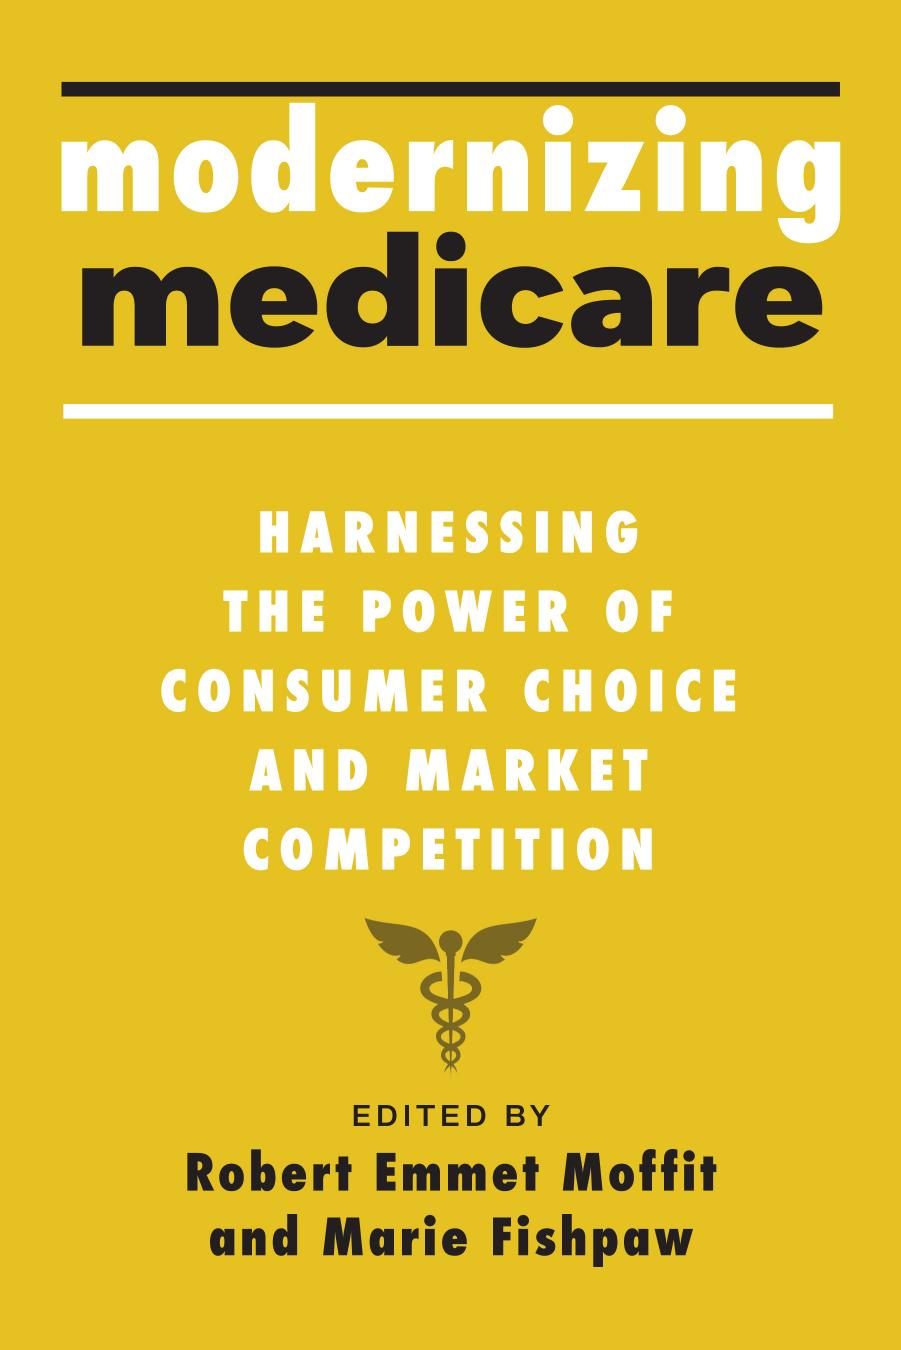 Modernizing Medicare: Harnessing the Power of Consumer Choice and Market Competition by Robert Emmet Moffit Marie Fishpaw